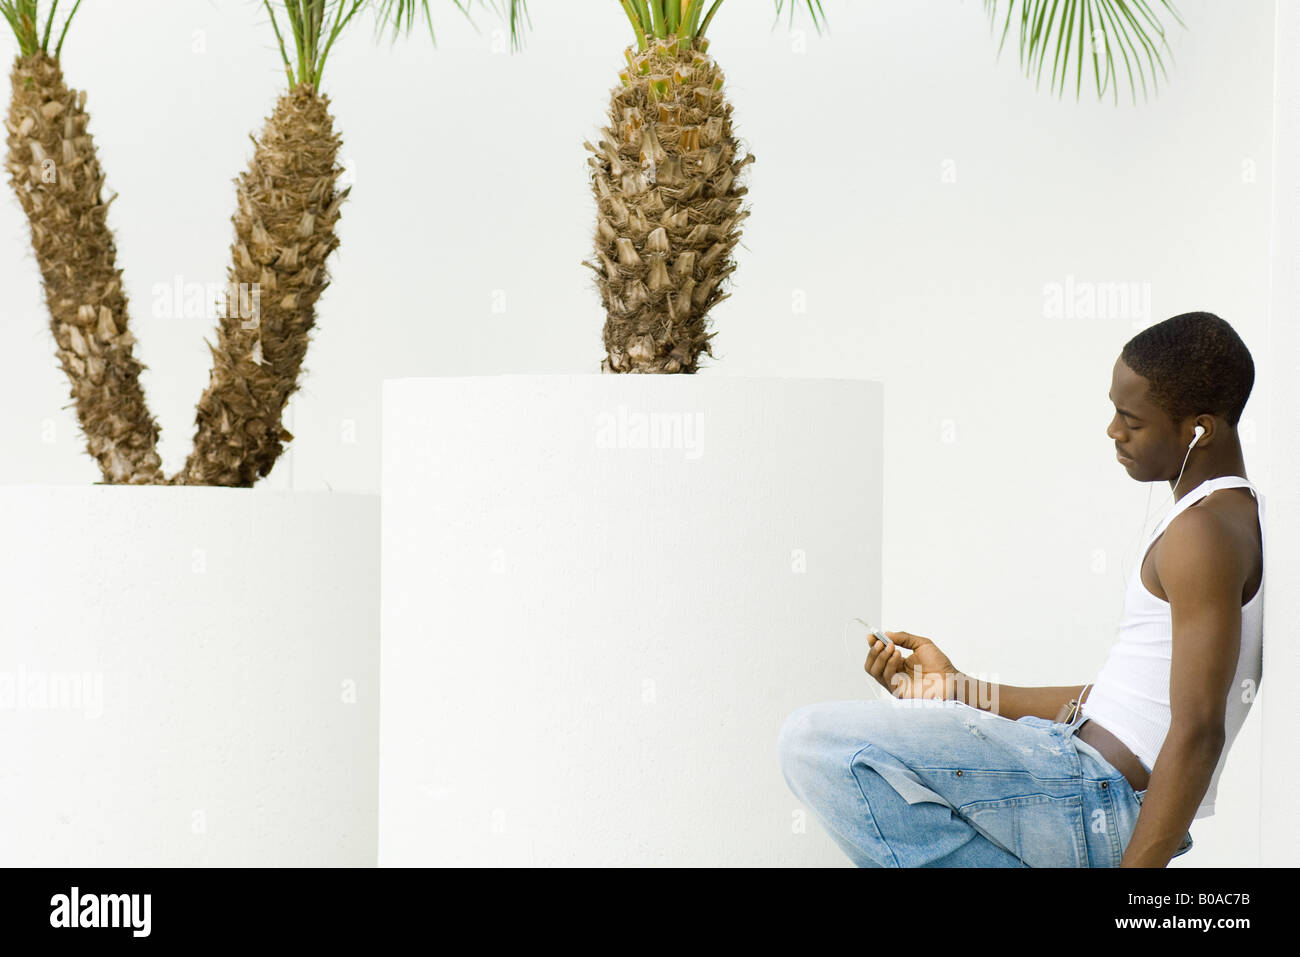 Teen boy listening to MP3 player, crouching, leaning against wall, potted palm trees in background Stock Photo